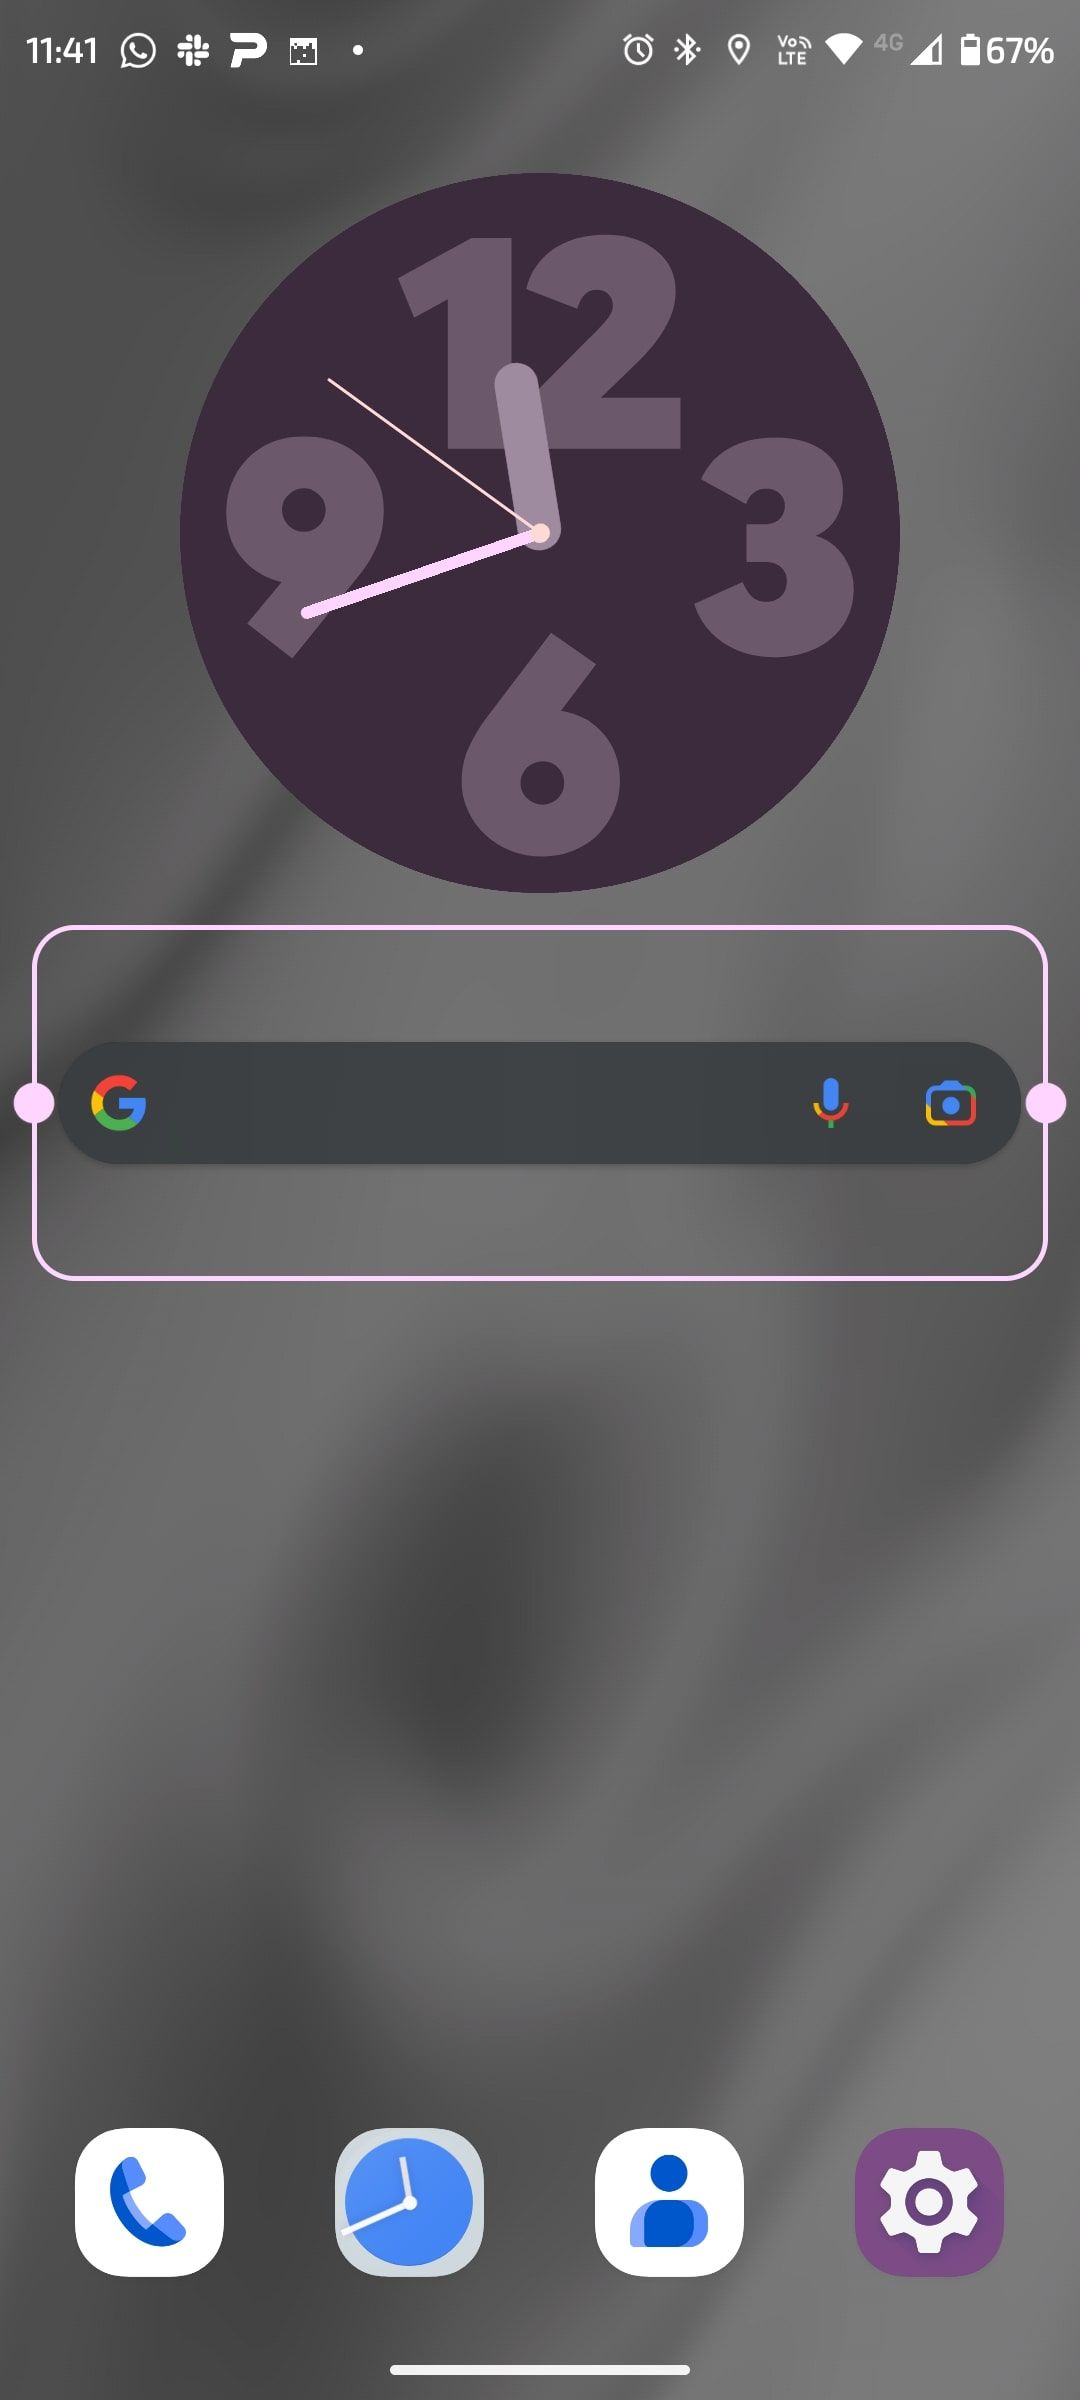 Android home screen with Google widget circled